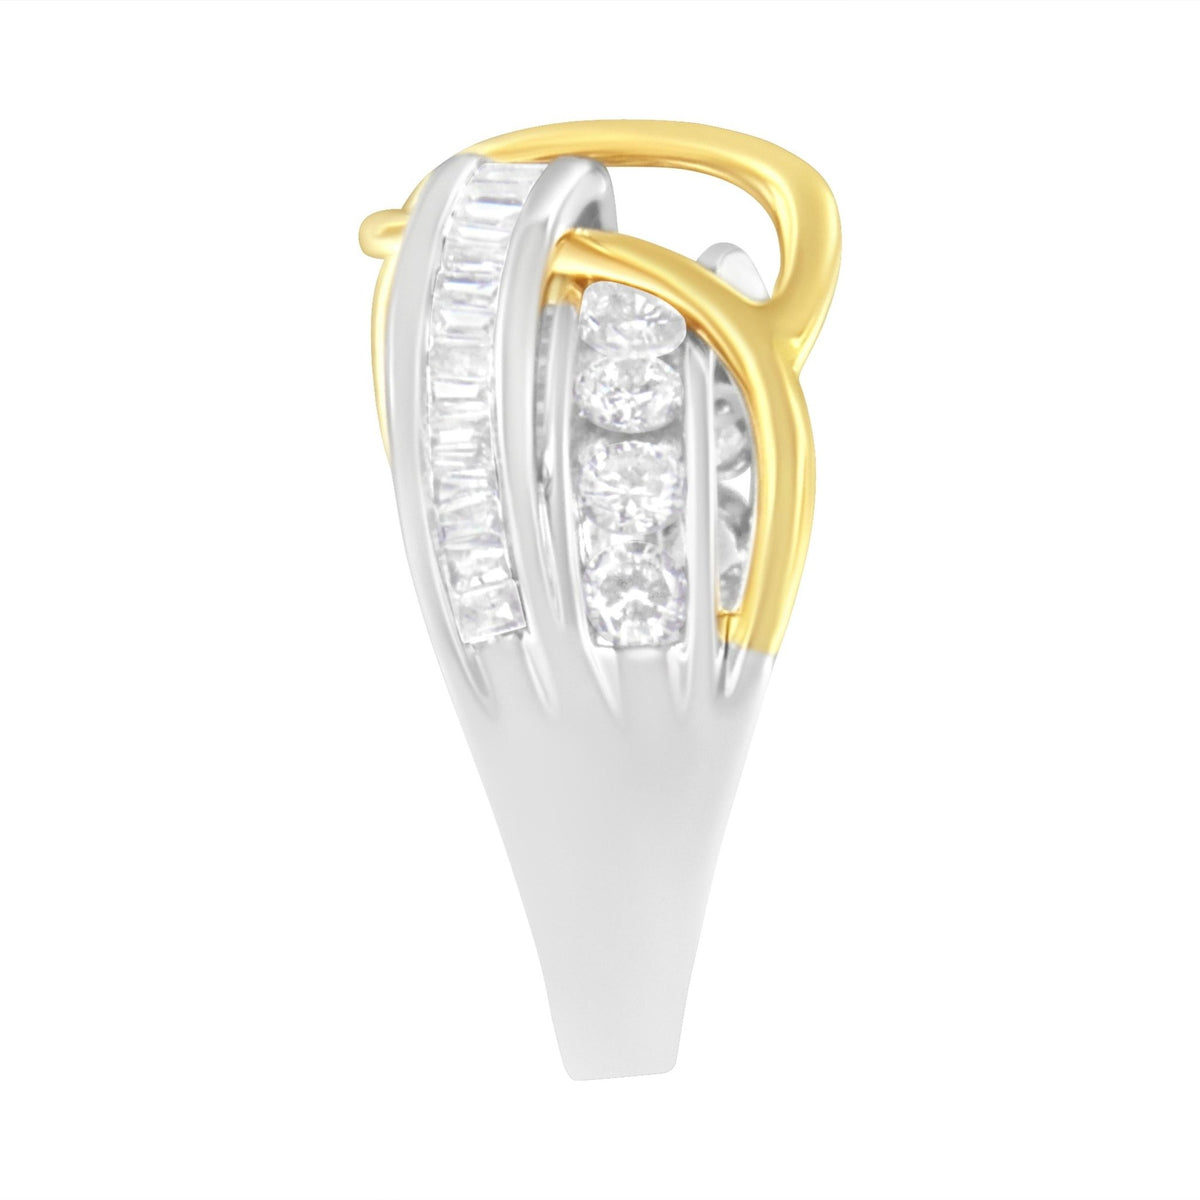 10K White and Yellow Gold 1 1/10 cttw Channel-Set Diamond Bypass Band Ring (J Color, I3 Clarity) – Size 7 - LinkagejewelrydesignLinkagejewelrydesign